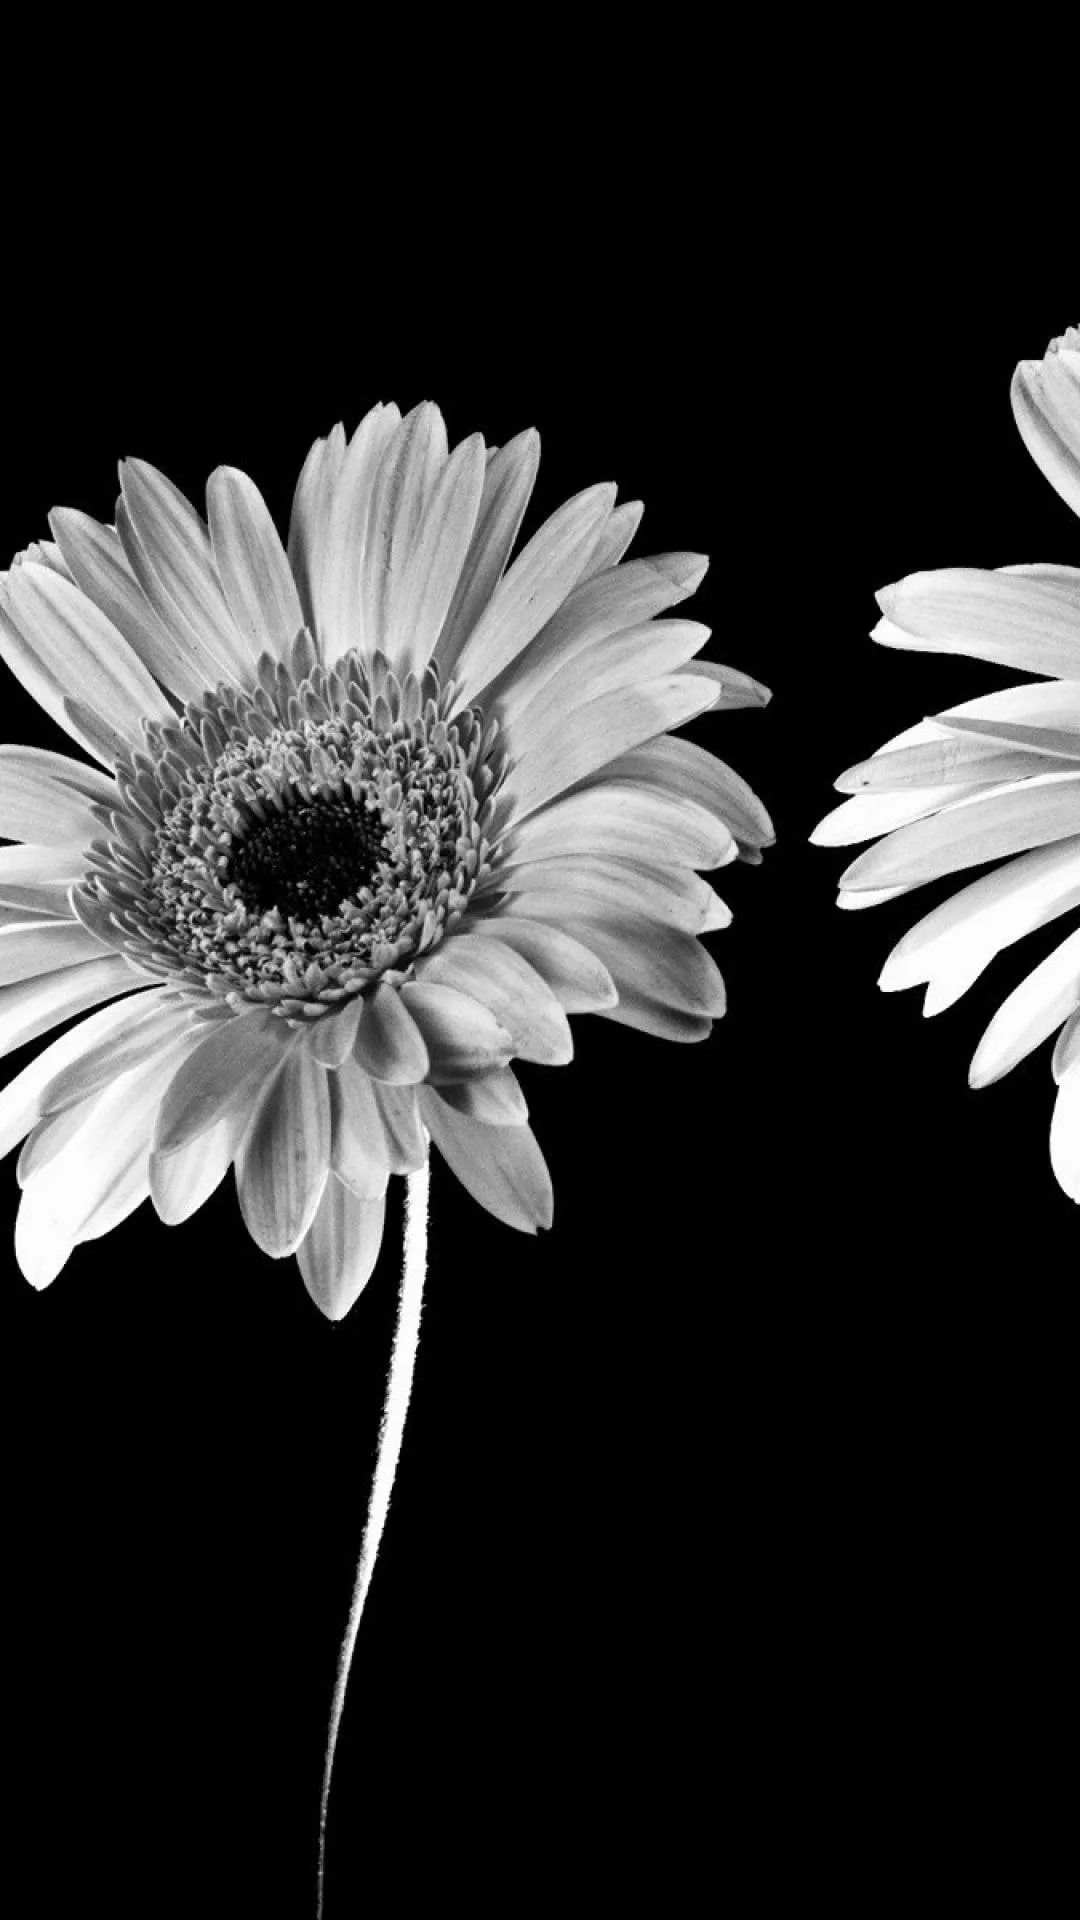 Black And White Flower cool phone wallpaper